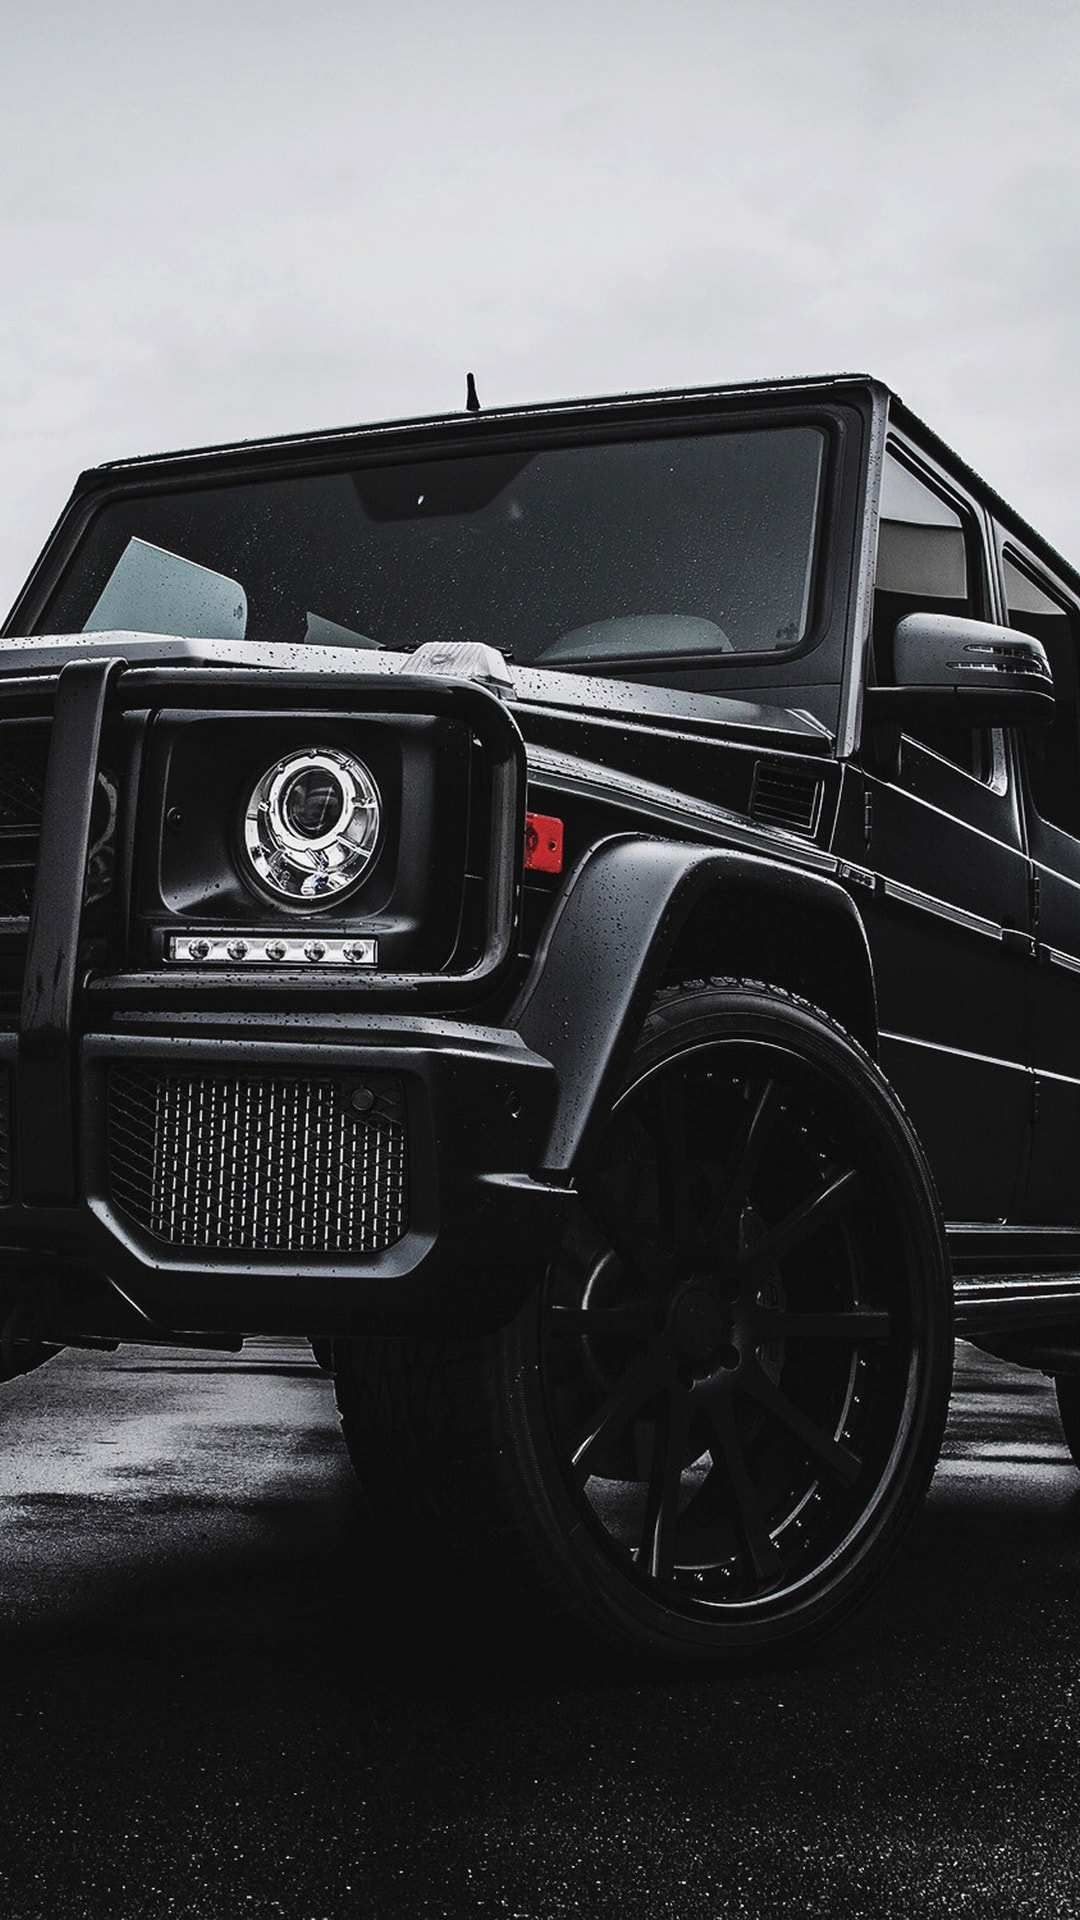 Hd Car Wallpapers For Iphone 11